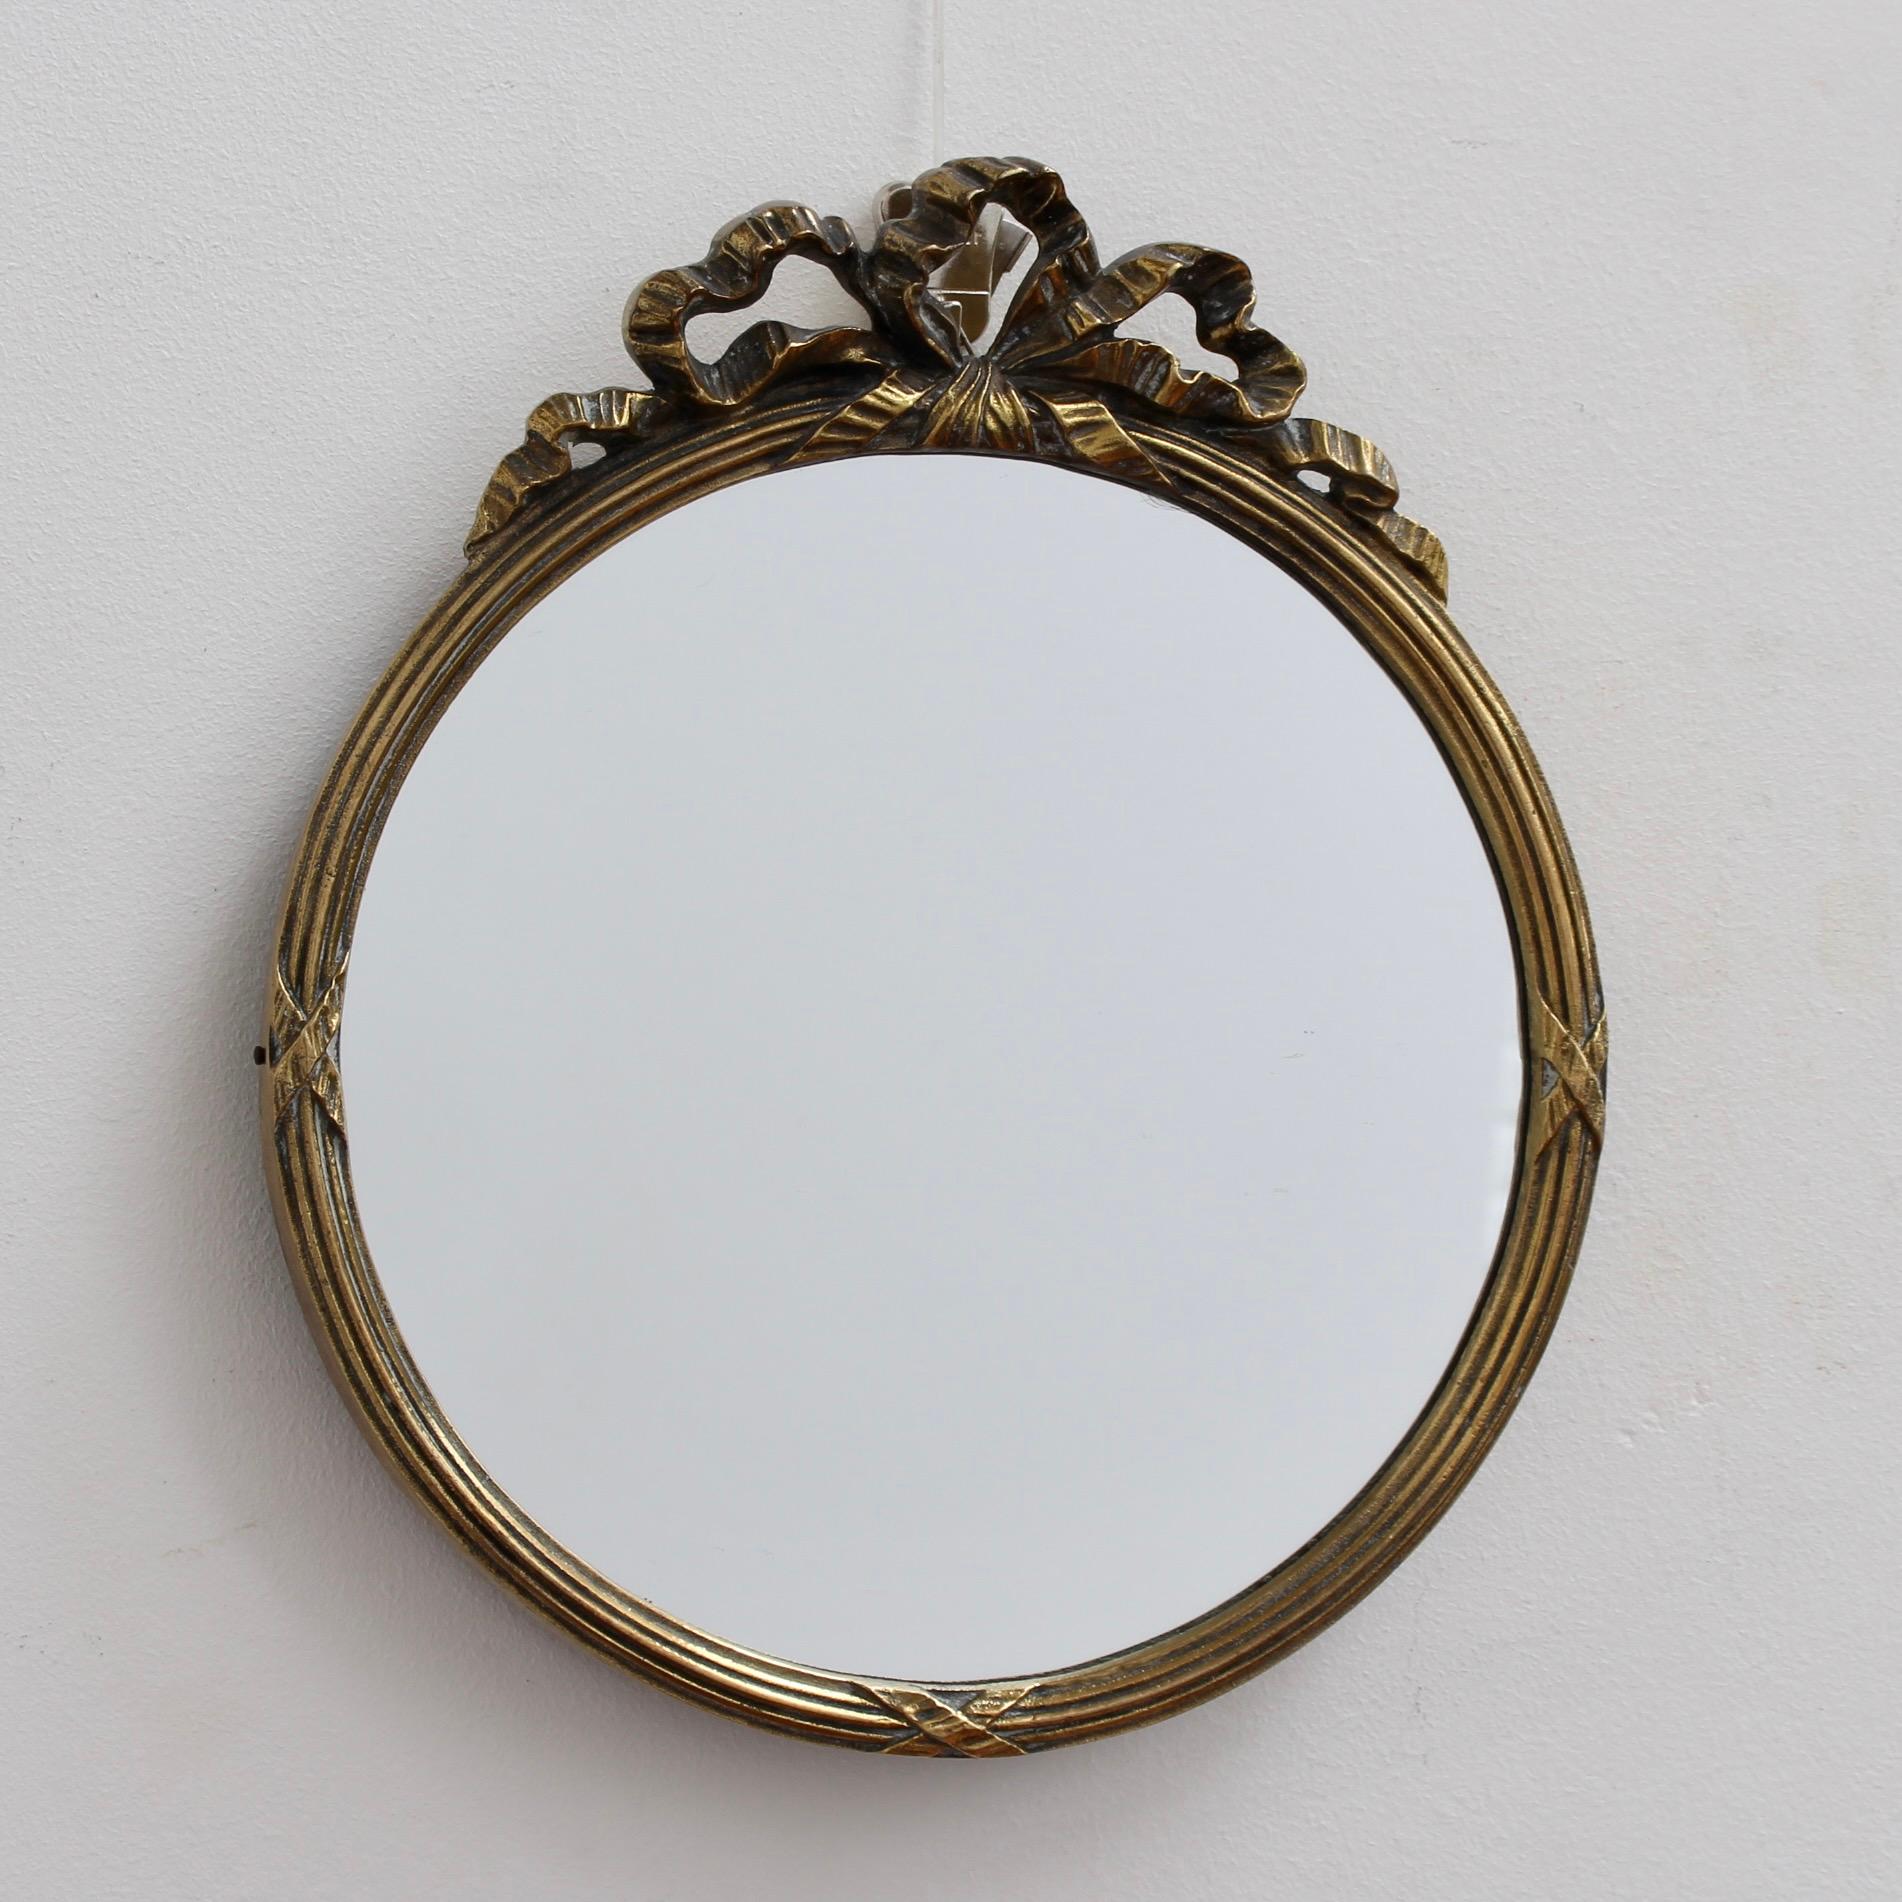 Vintage Italian wall mirror with brass frame (circa 1950s). Like something from a Sophia Loren film, this small brass-framed wall mirror (diameter = 24.5 cm / 9.6